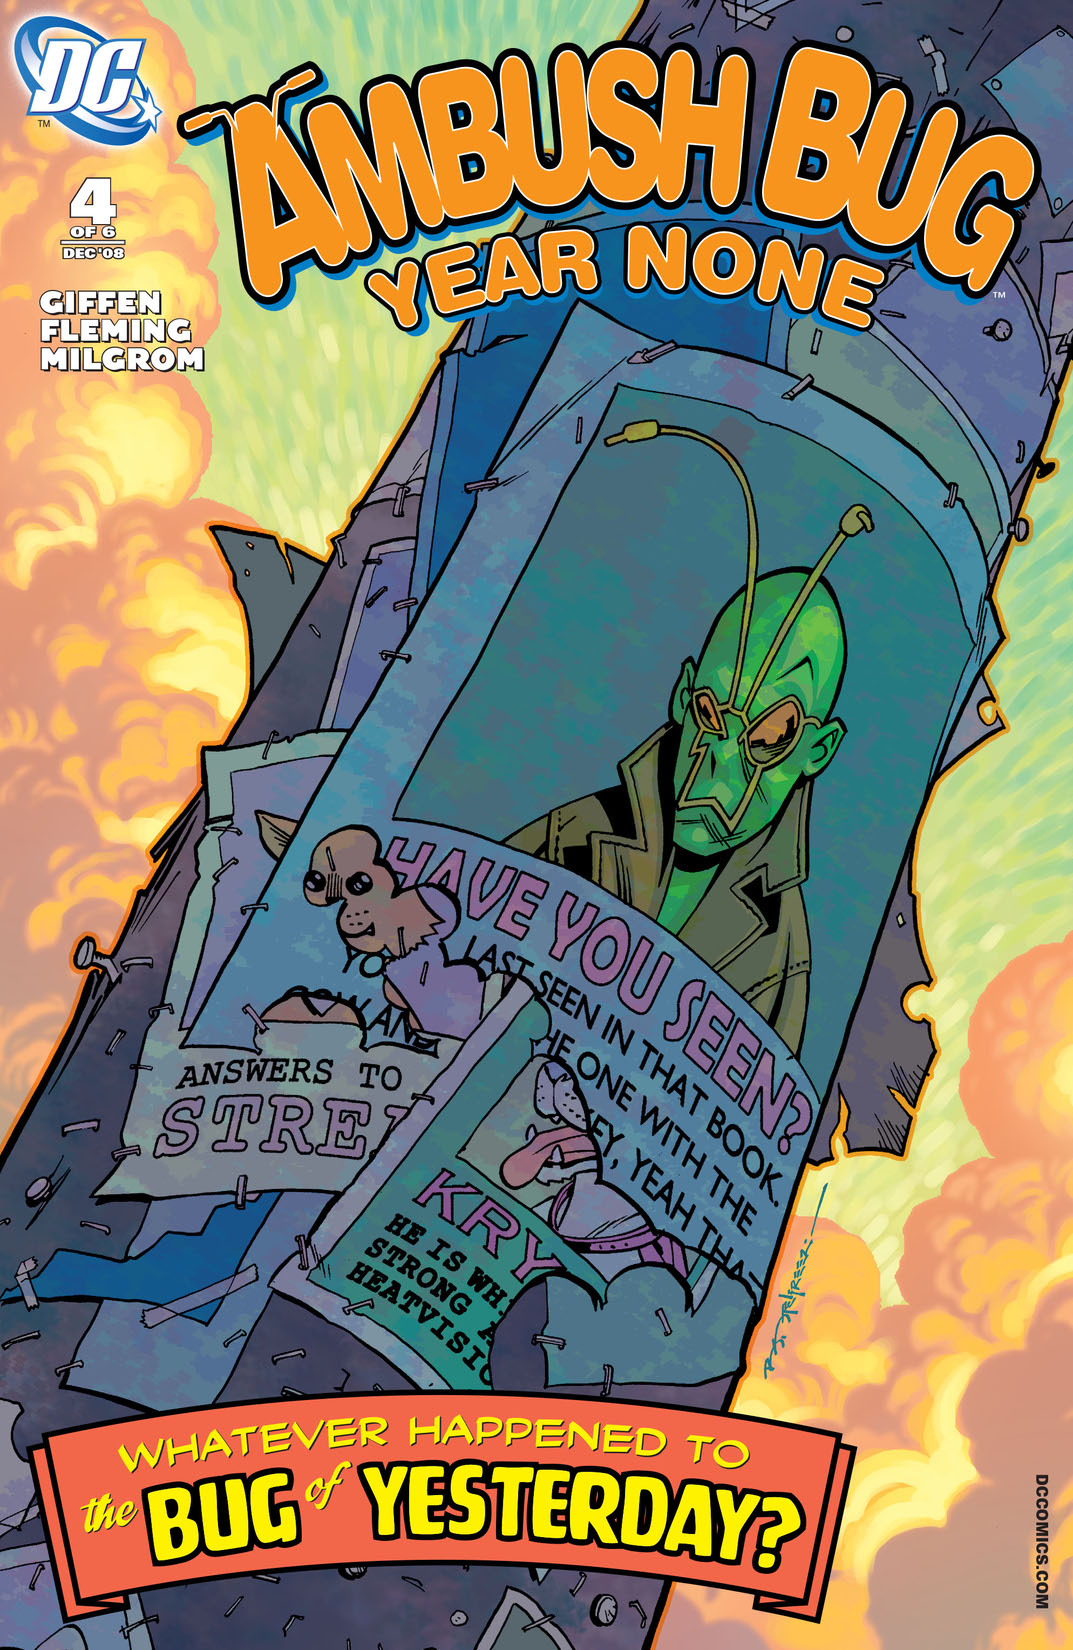 Ambush Bug: Year None #4 preview images